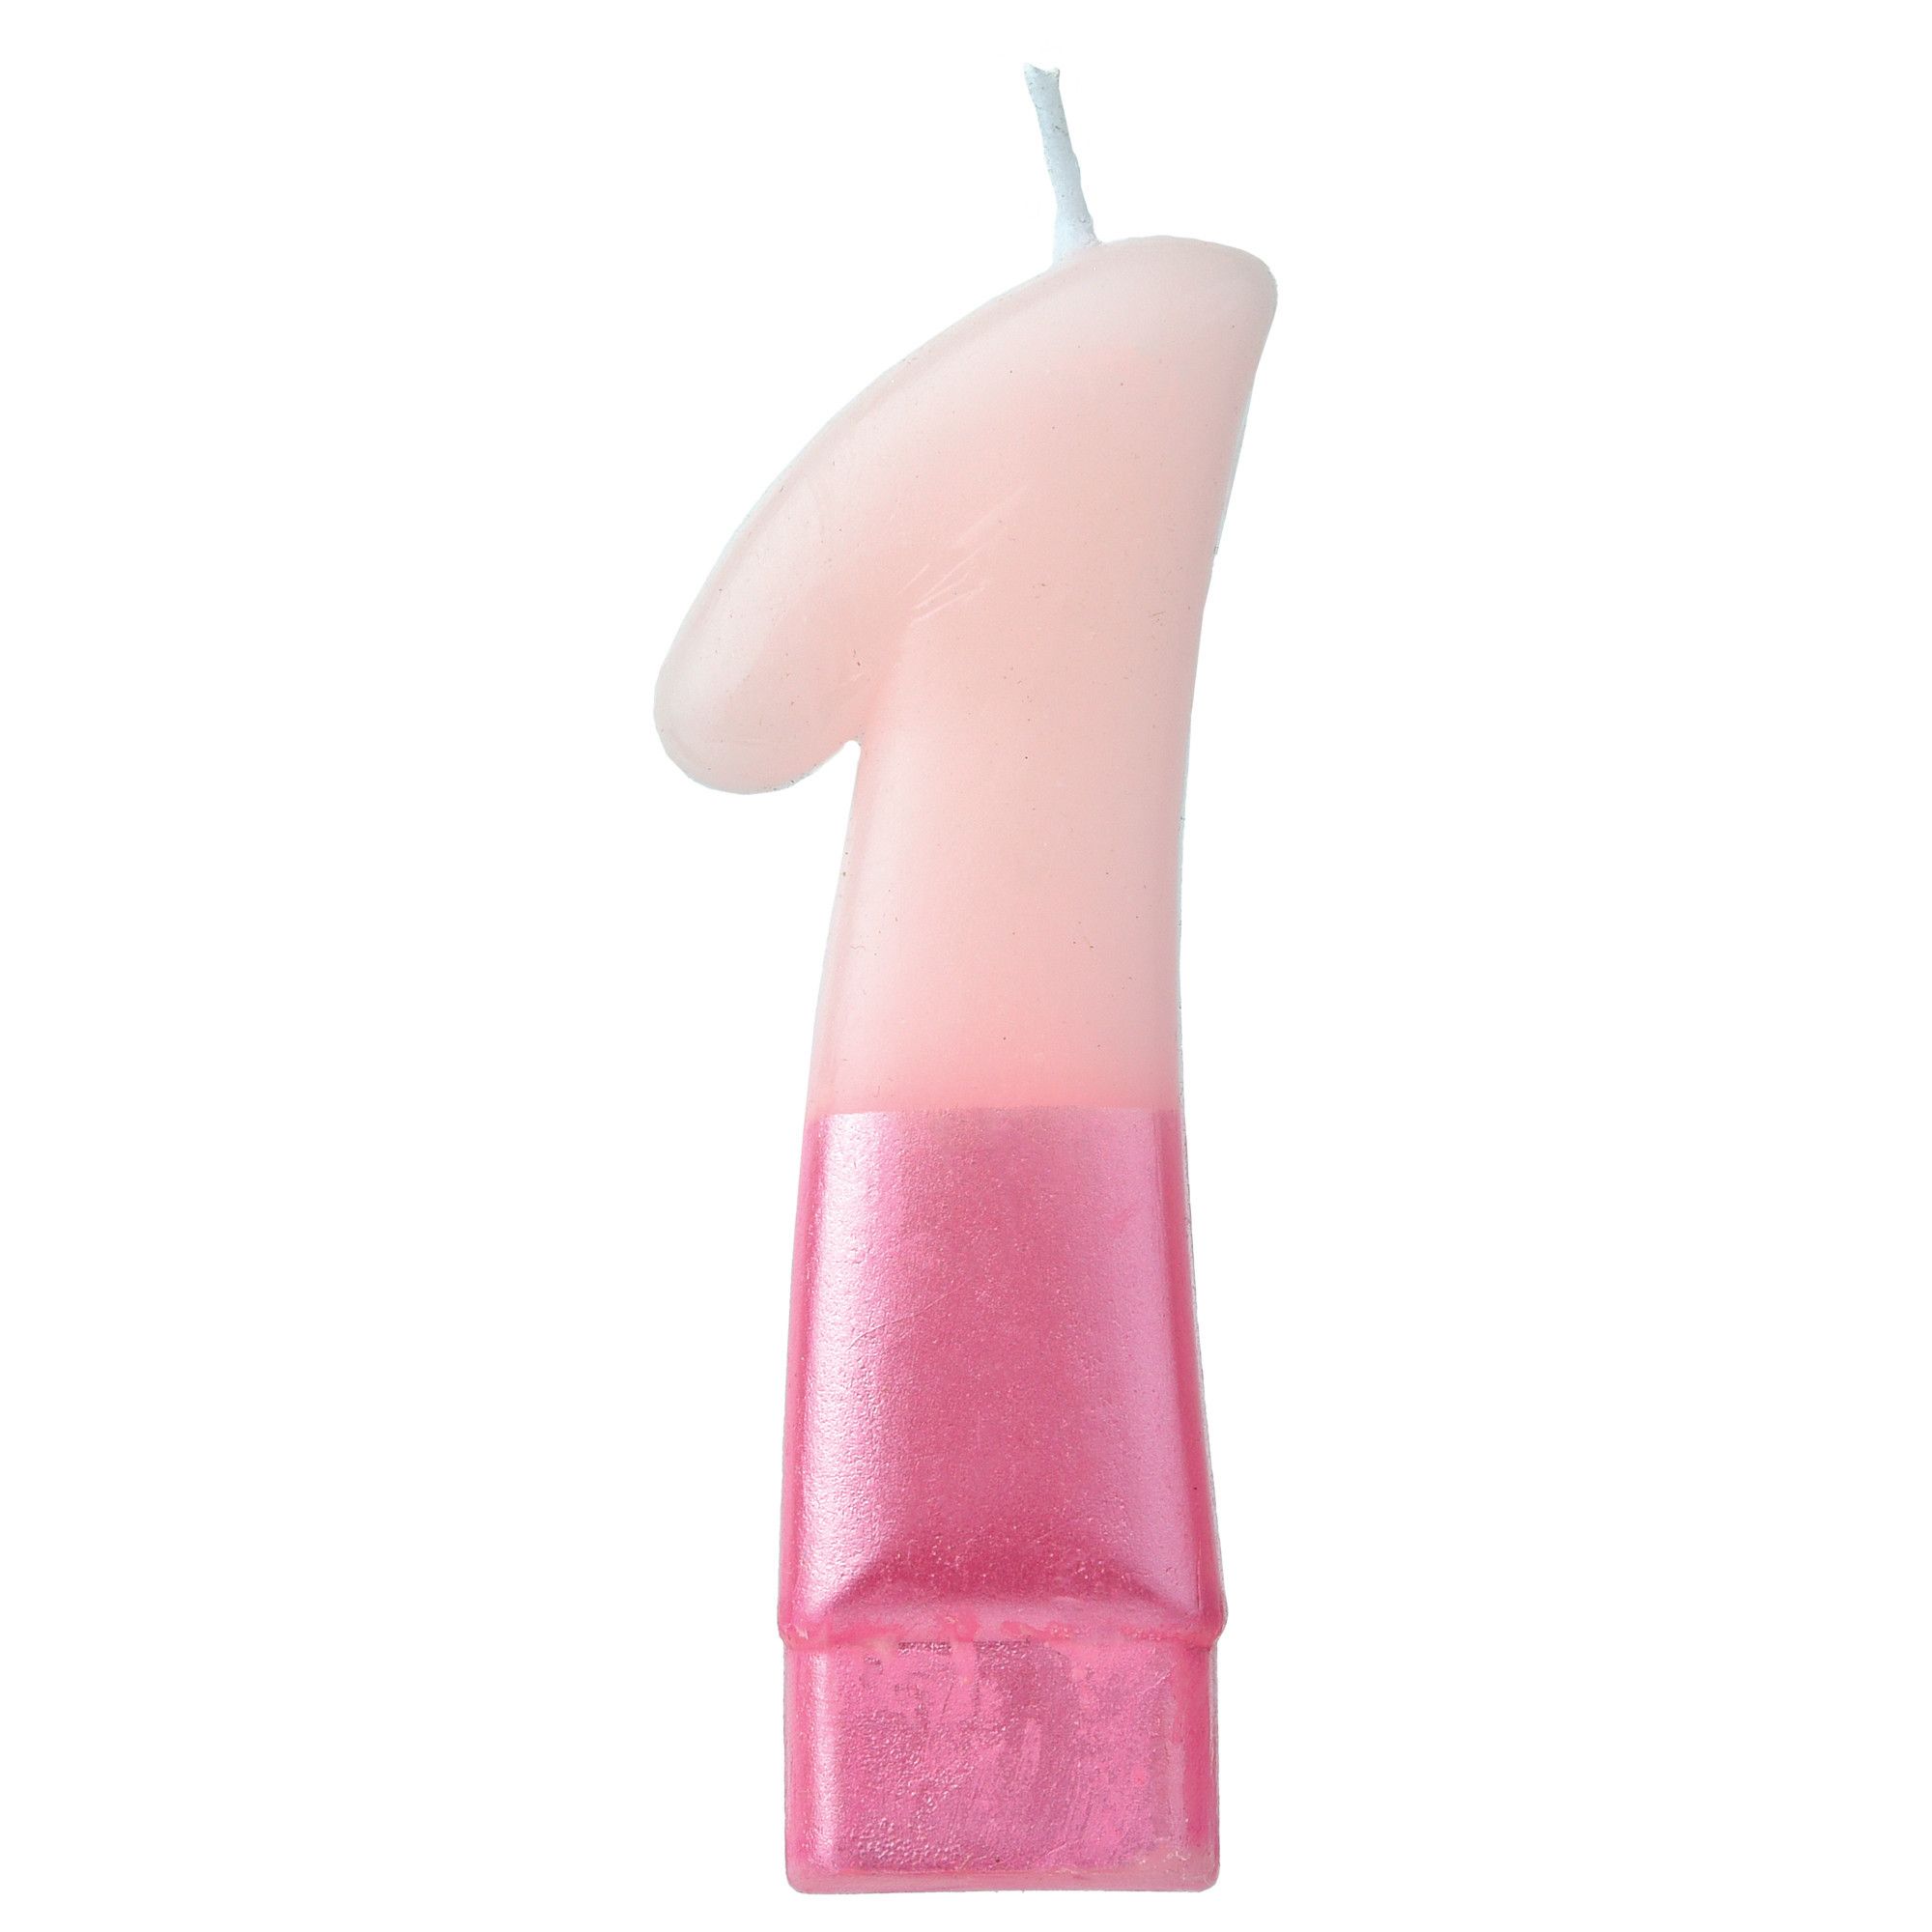 #1 Pink ombre candle